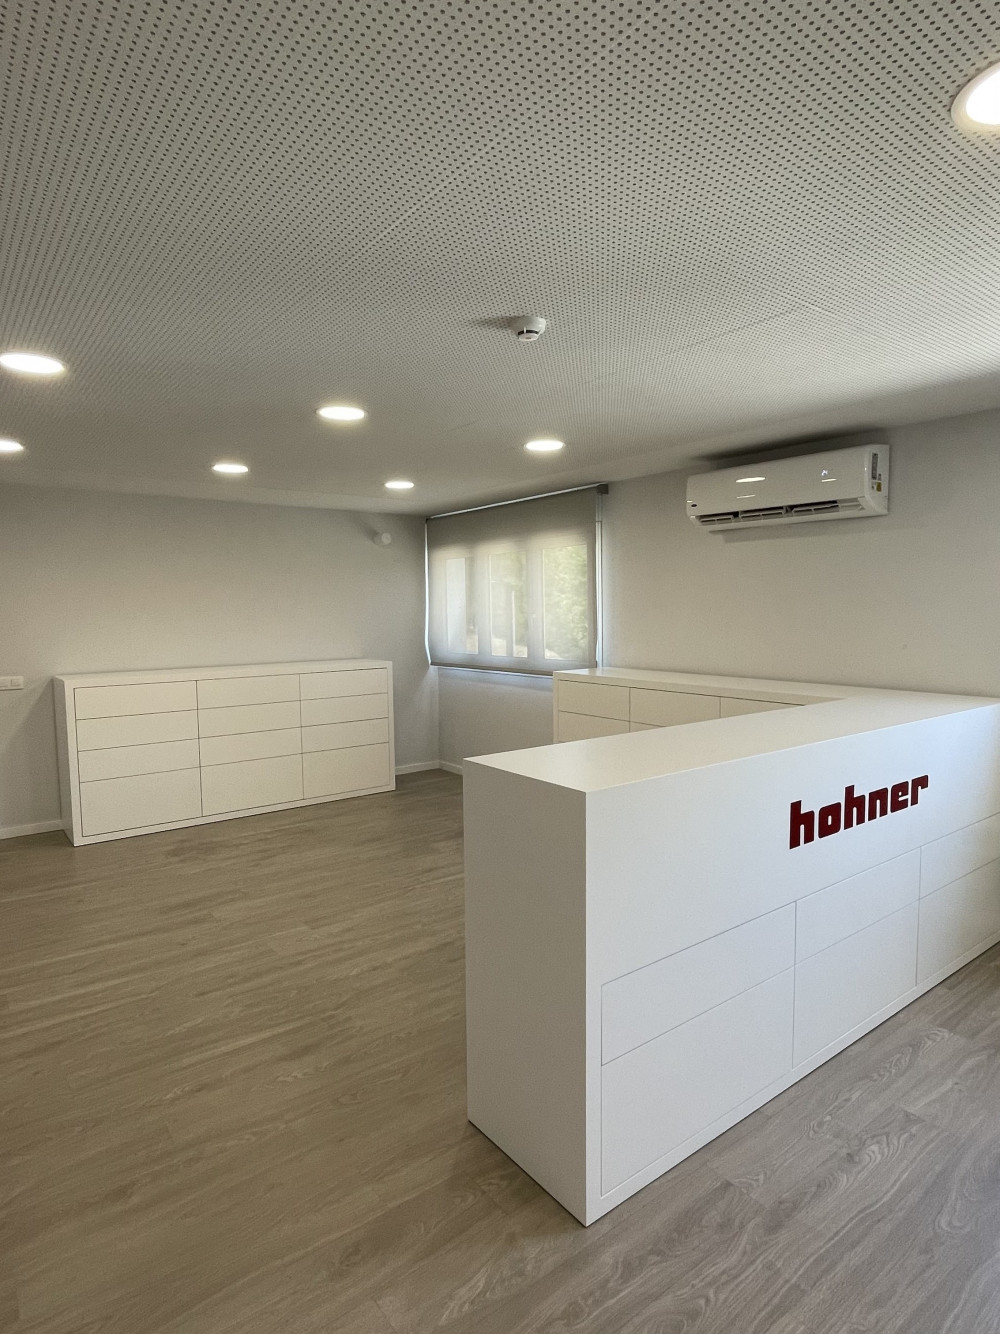 SHOWROOM HOHNER AUTOMATION